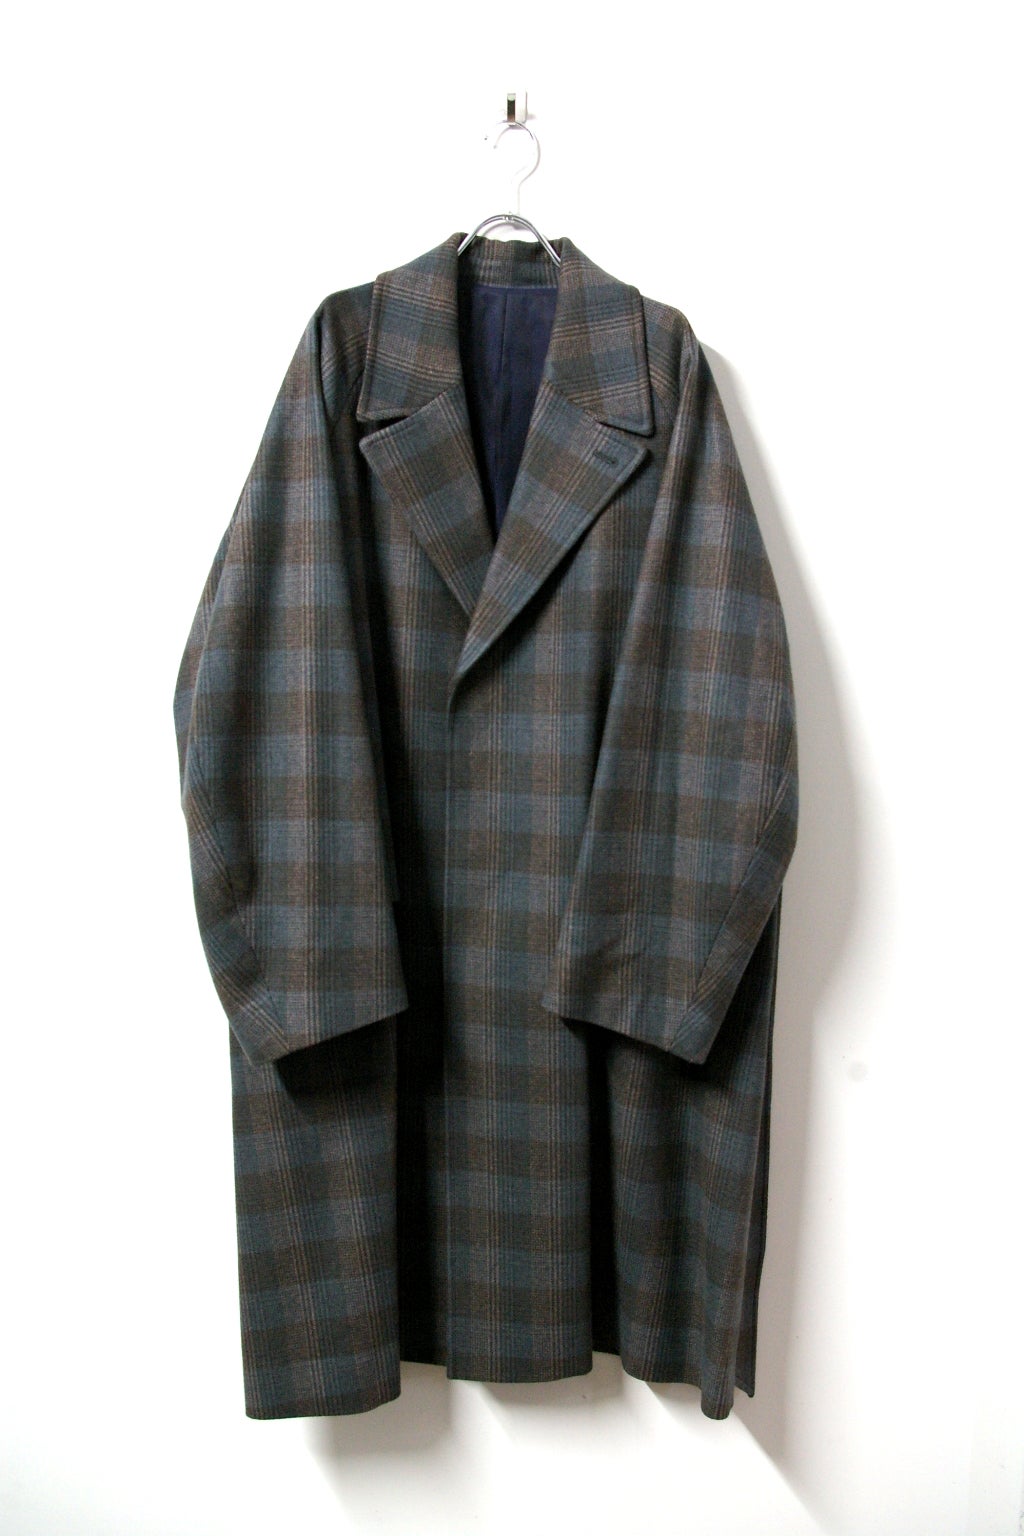 URU(ウル)/WOOL CHECK BELTED COAT/Gray 通販 取り扱い-CONCRETE RIVER